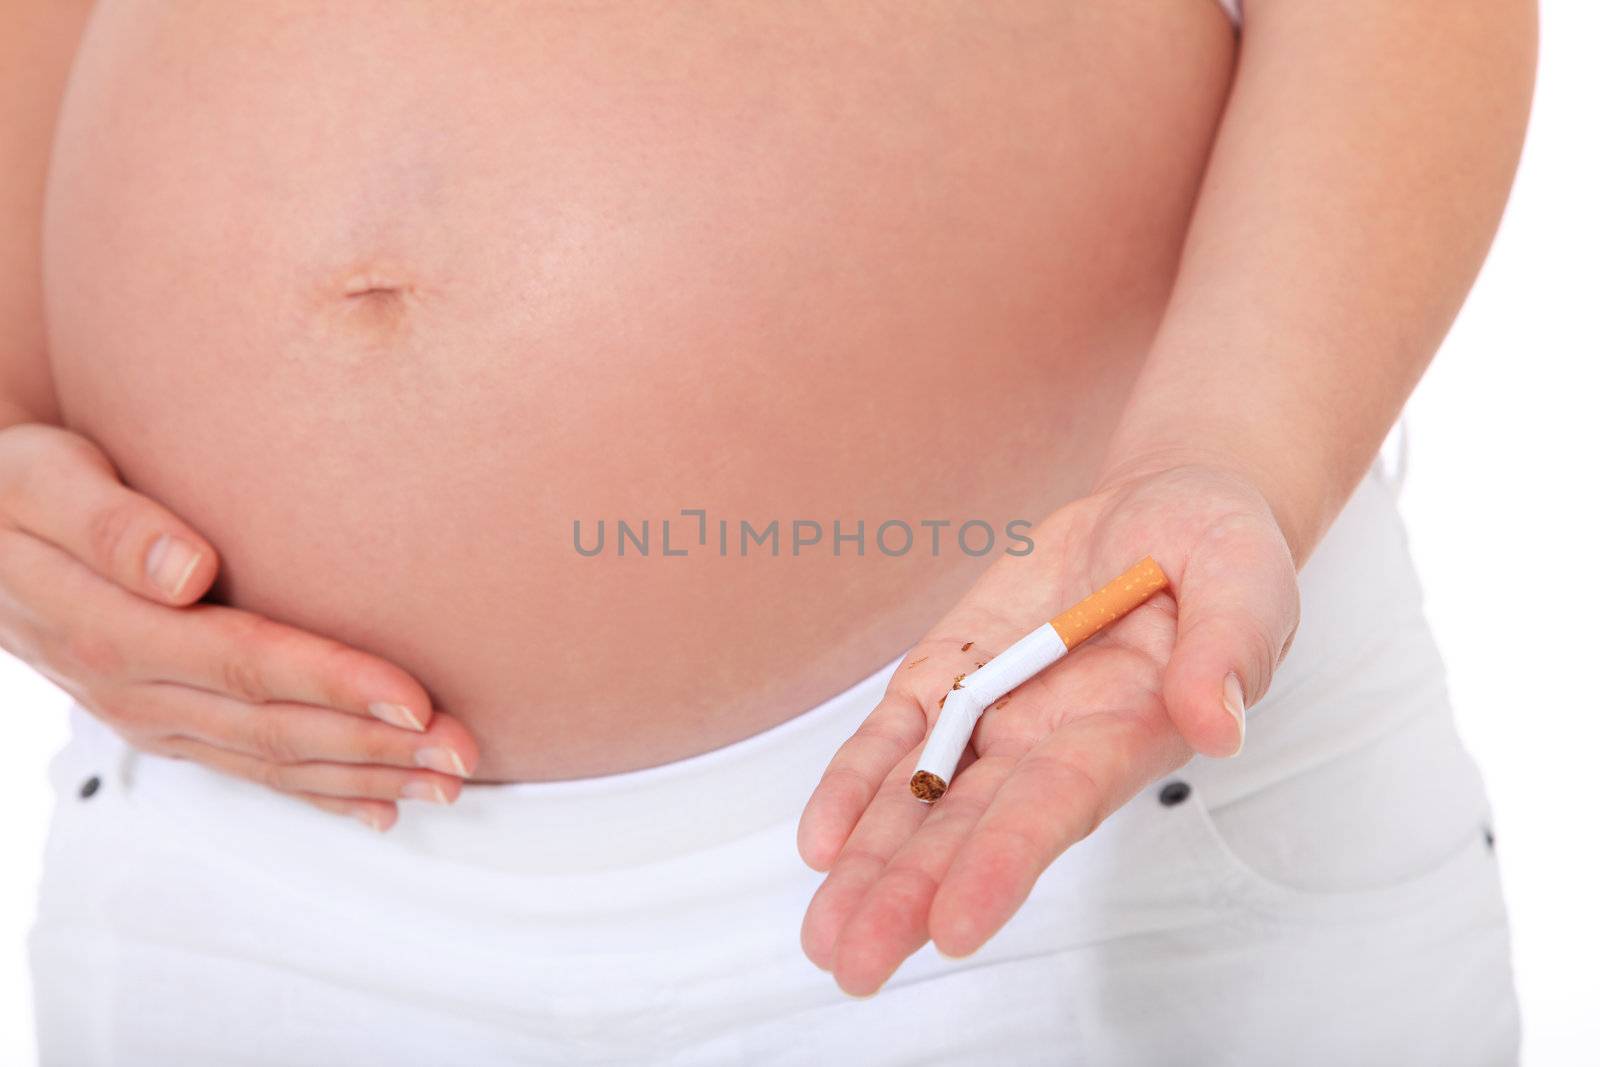 Pregnant woman quits smoking. All on white background.